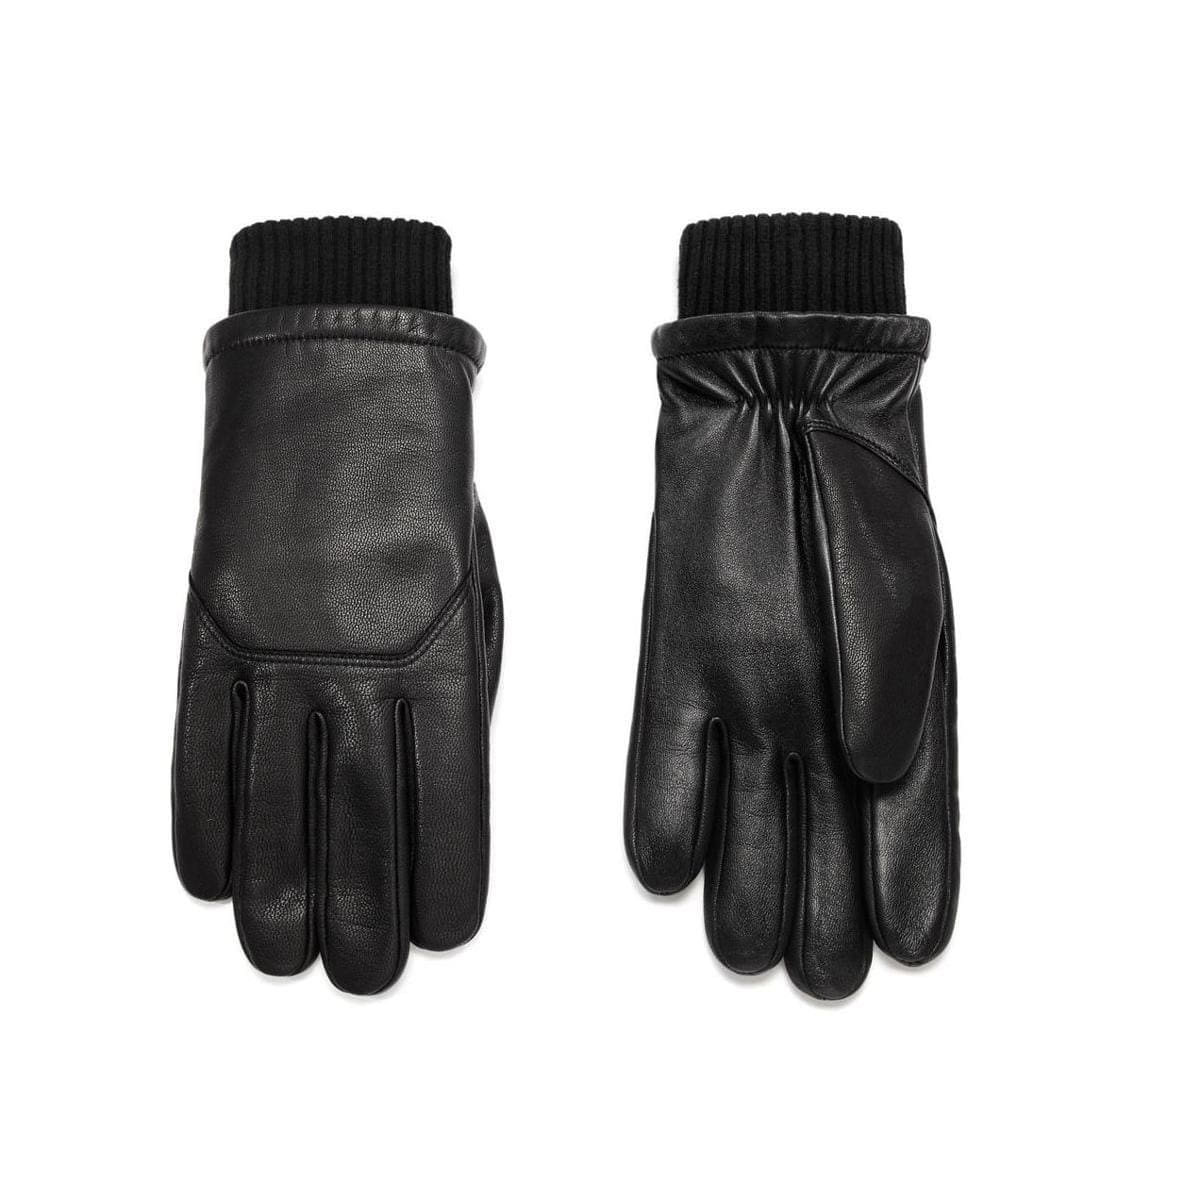 Workman gloves by Canada Goose